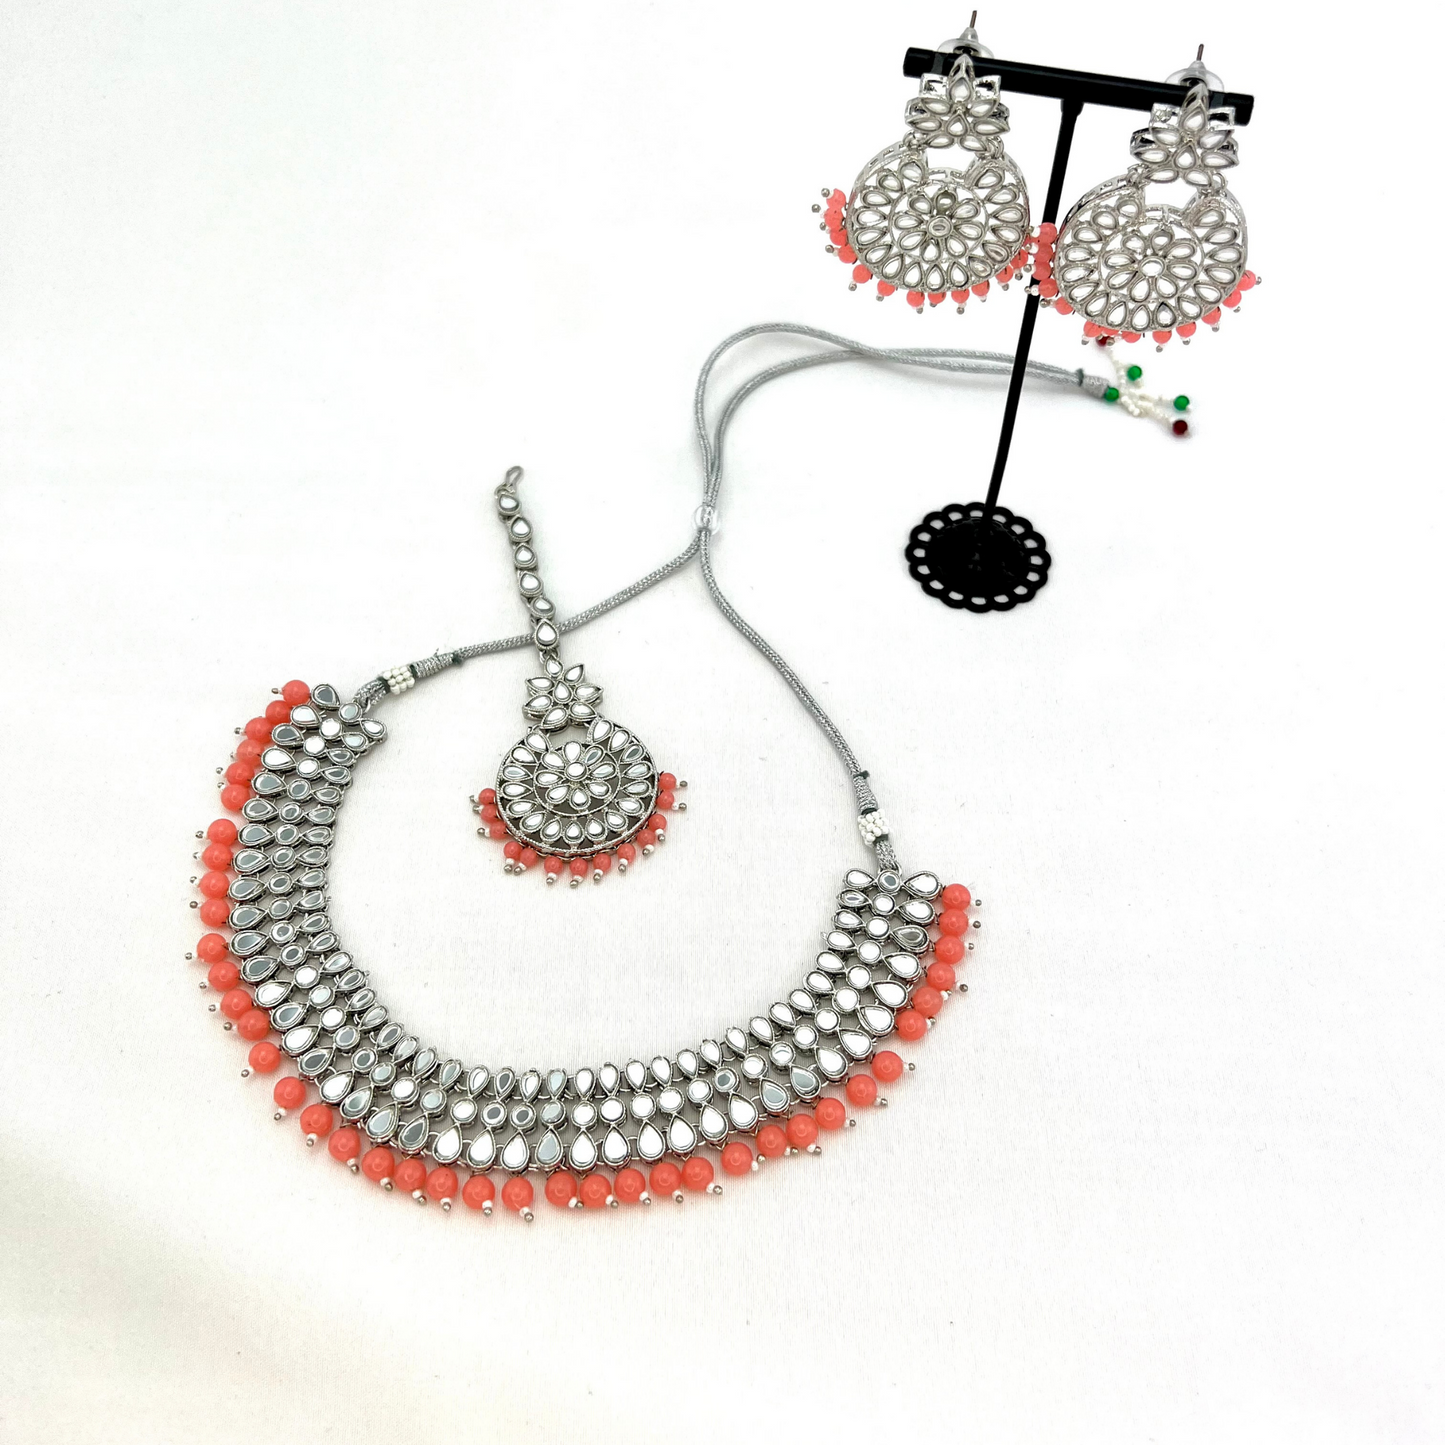 ﻿Mirror necklace set with pink beads.  Set includes, necklace, tikka and earrings.  Prefect for Indian weddings, parties and special occasions.  Latest 2022 fashion. High end Indian fashion jewellery with top quality stones and beads.